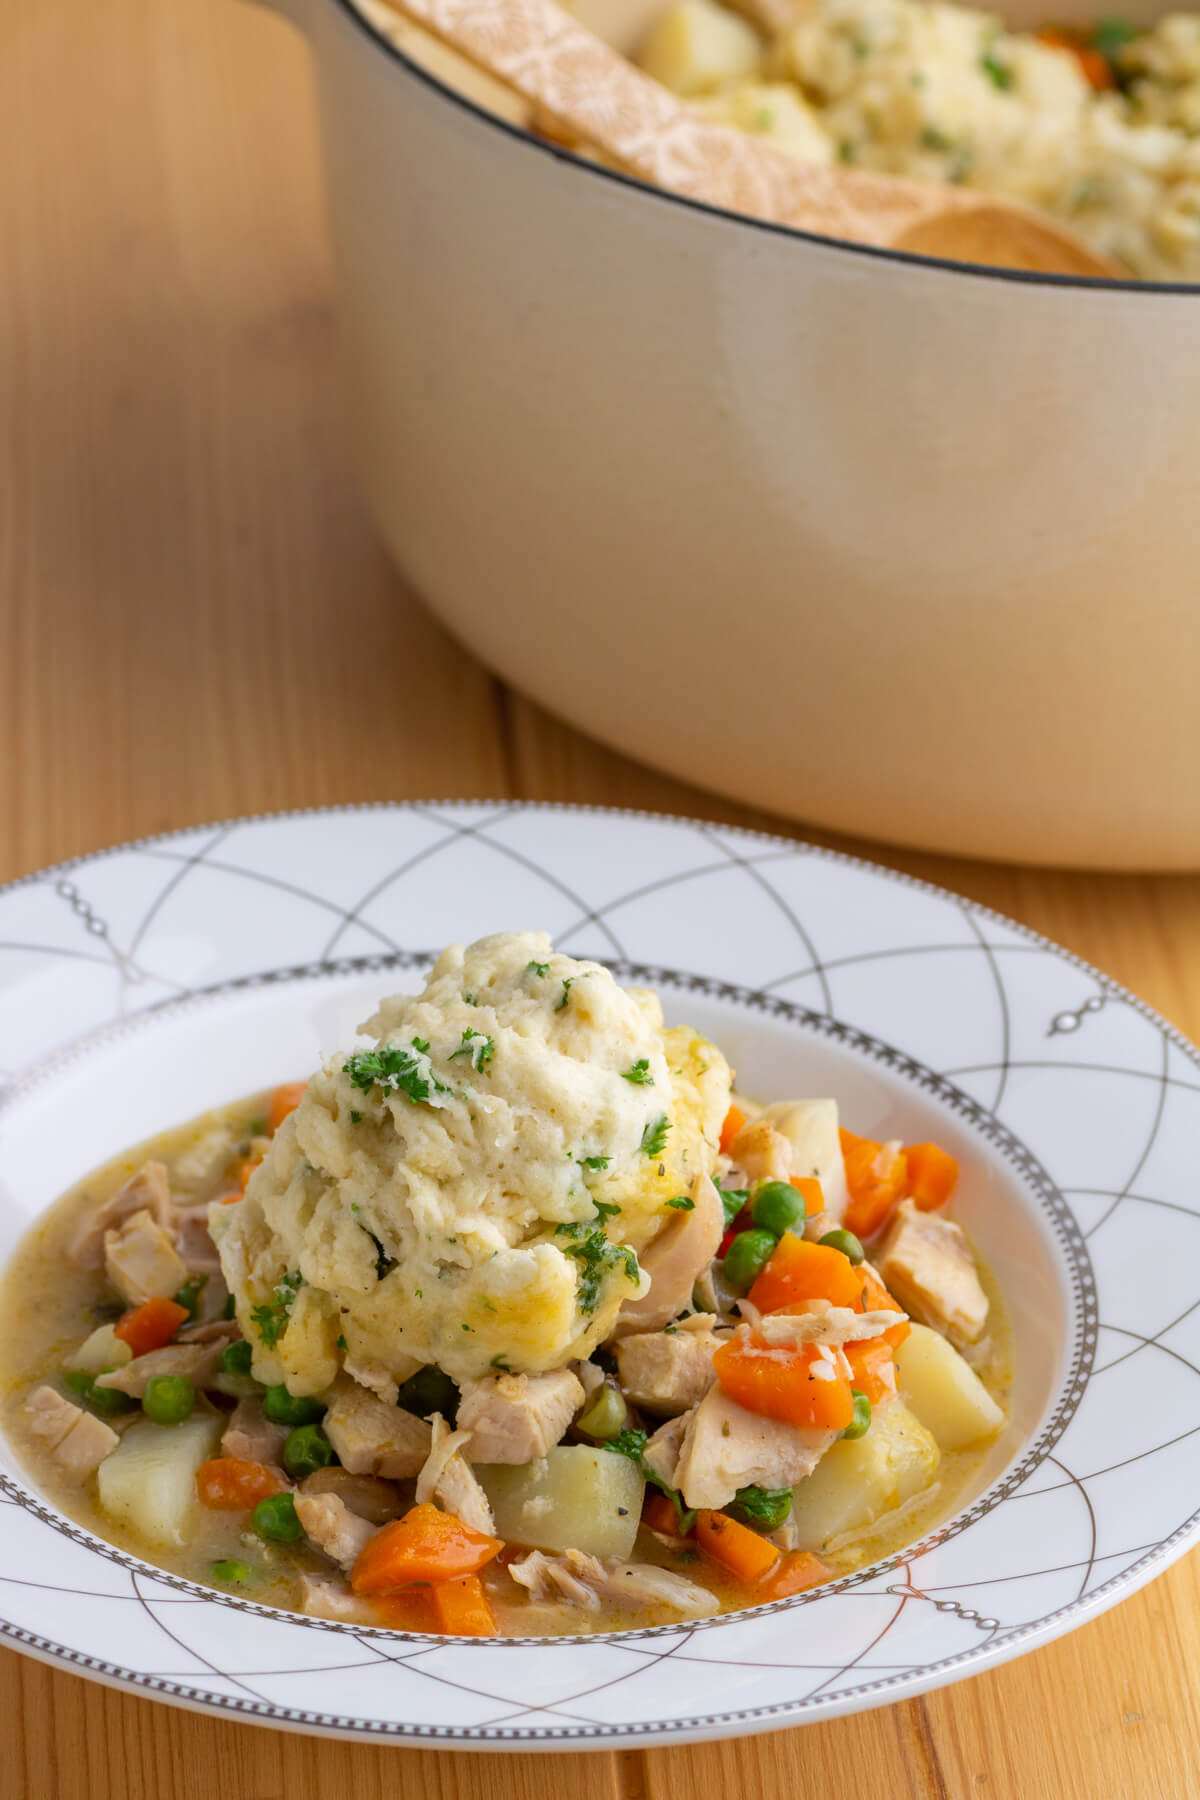 A bowl full of Chicken and Dumplings.